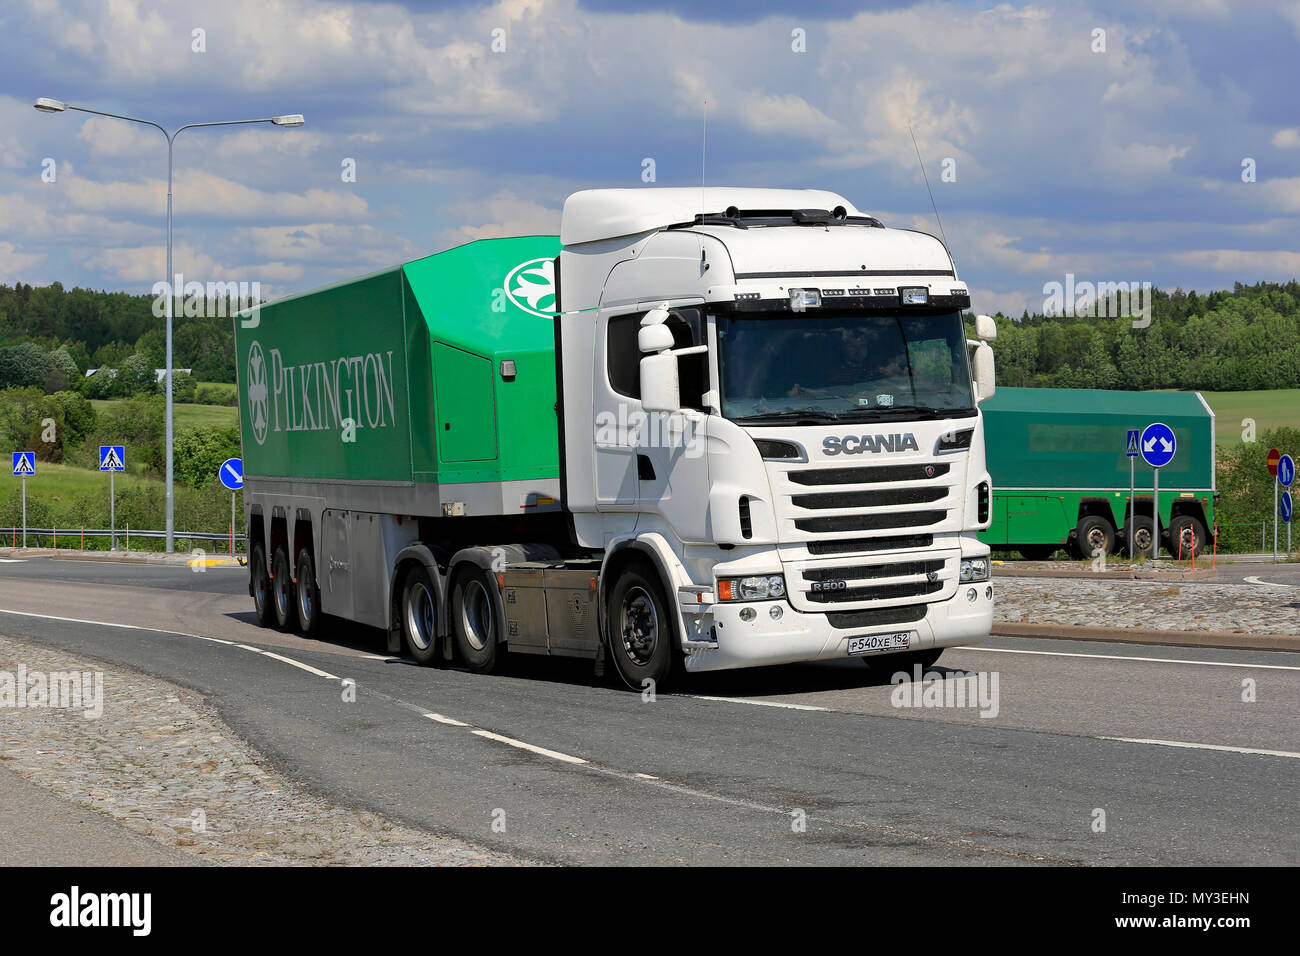 Glass transporters, White Scania R560 and Pilkington Glass Trailer in front, on intersection on a day of summer in Salo, Finland - June 2, 2018. Stock Photo